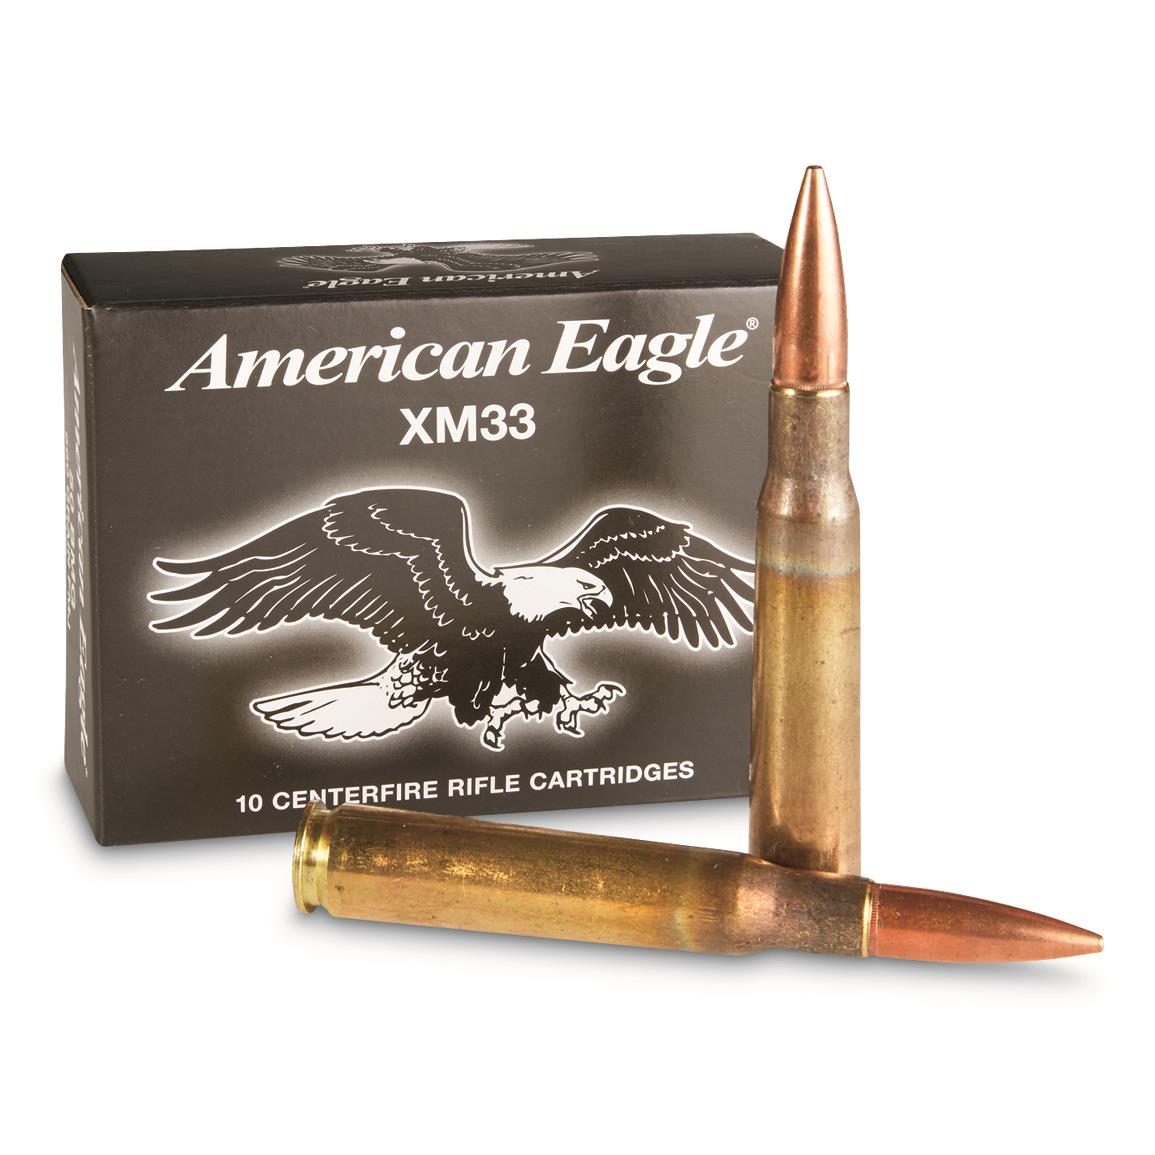 American Eagle 50 Cal Fmj 660 Grain 10 Rounds 50 Bmg Ammo At Sportsman S Guide